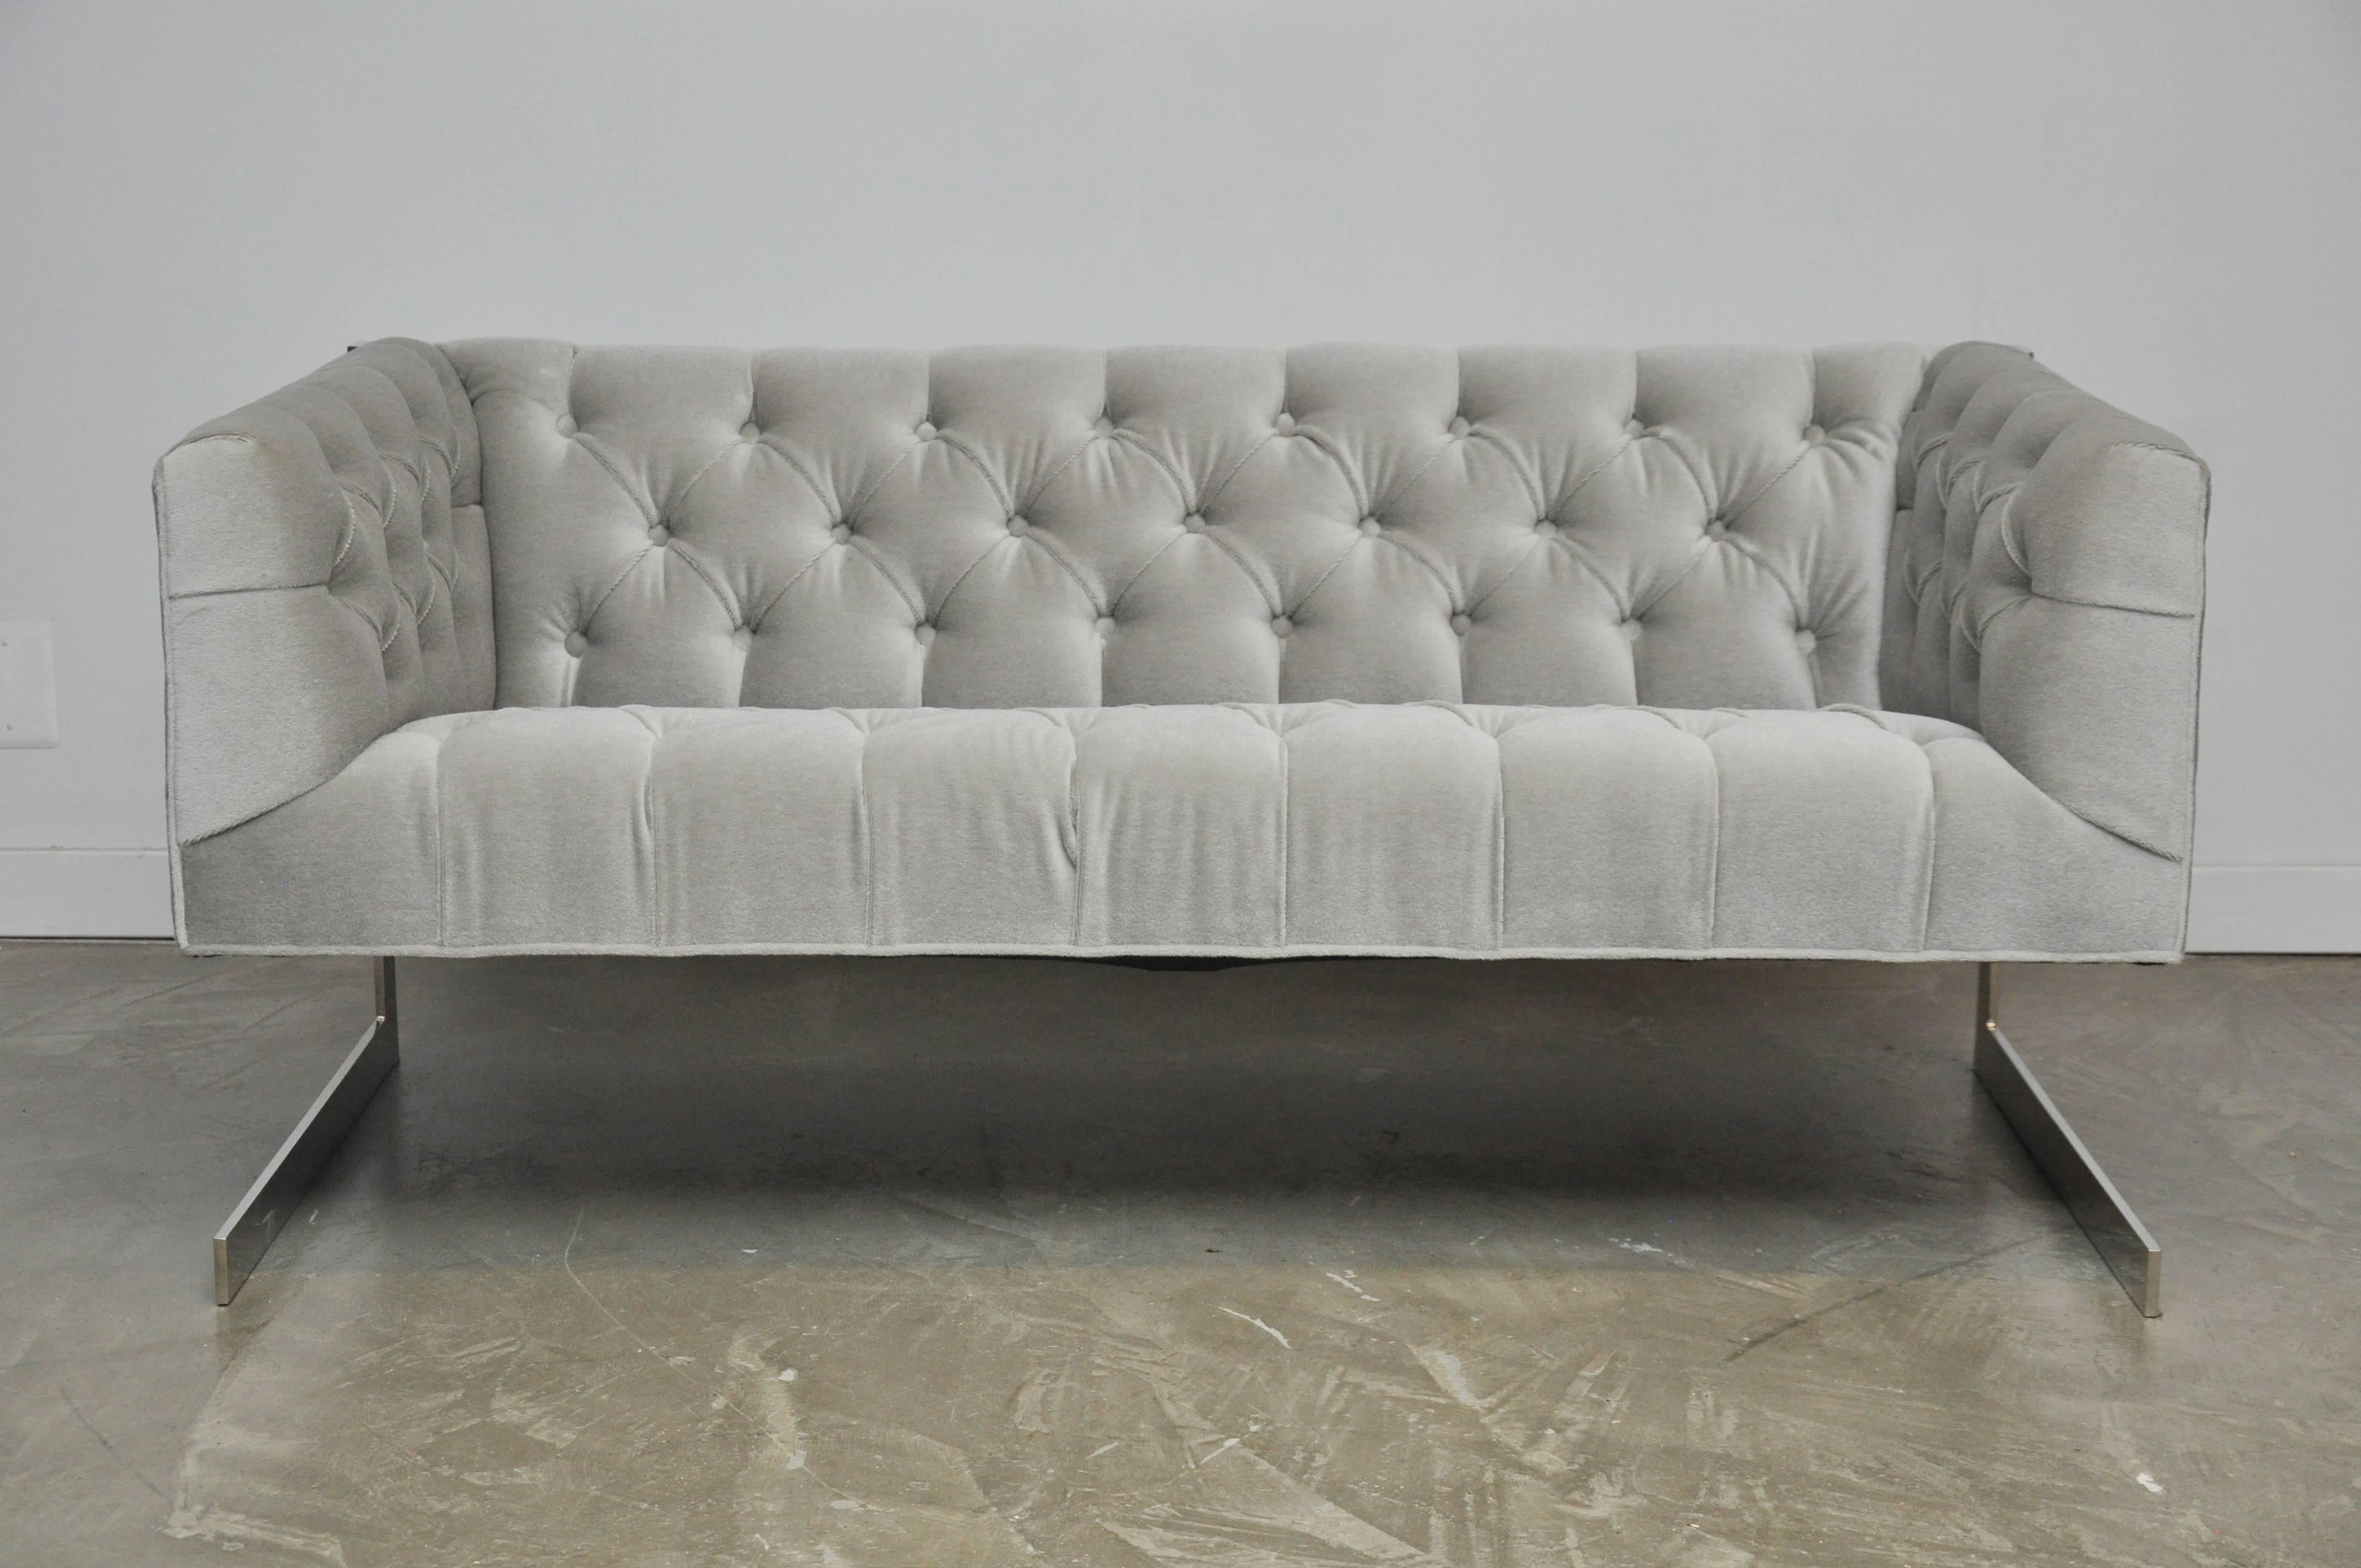 Chrome frame cantilever sofa by Milo Baughman. Fully restored. Newly upholstered in tufted grey mohair.